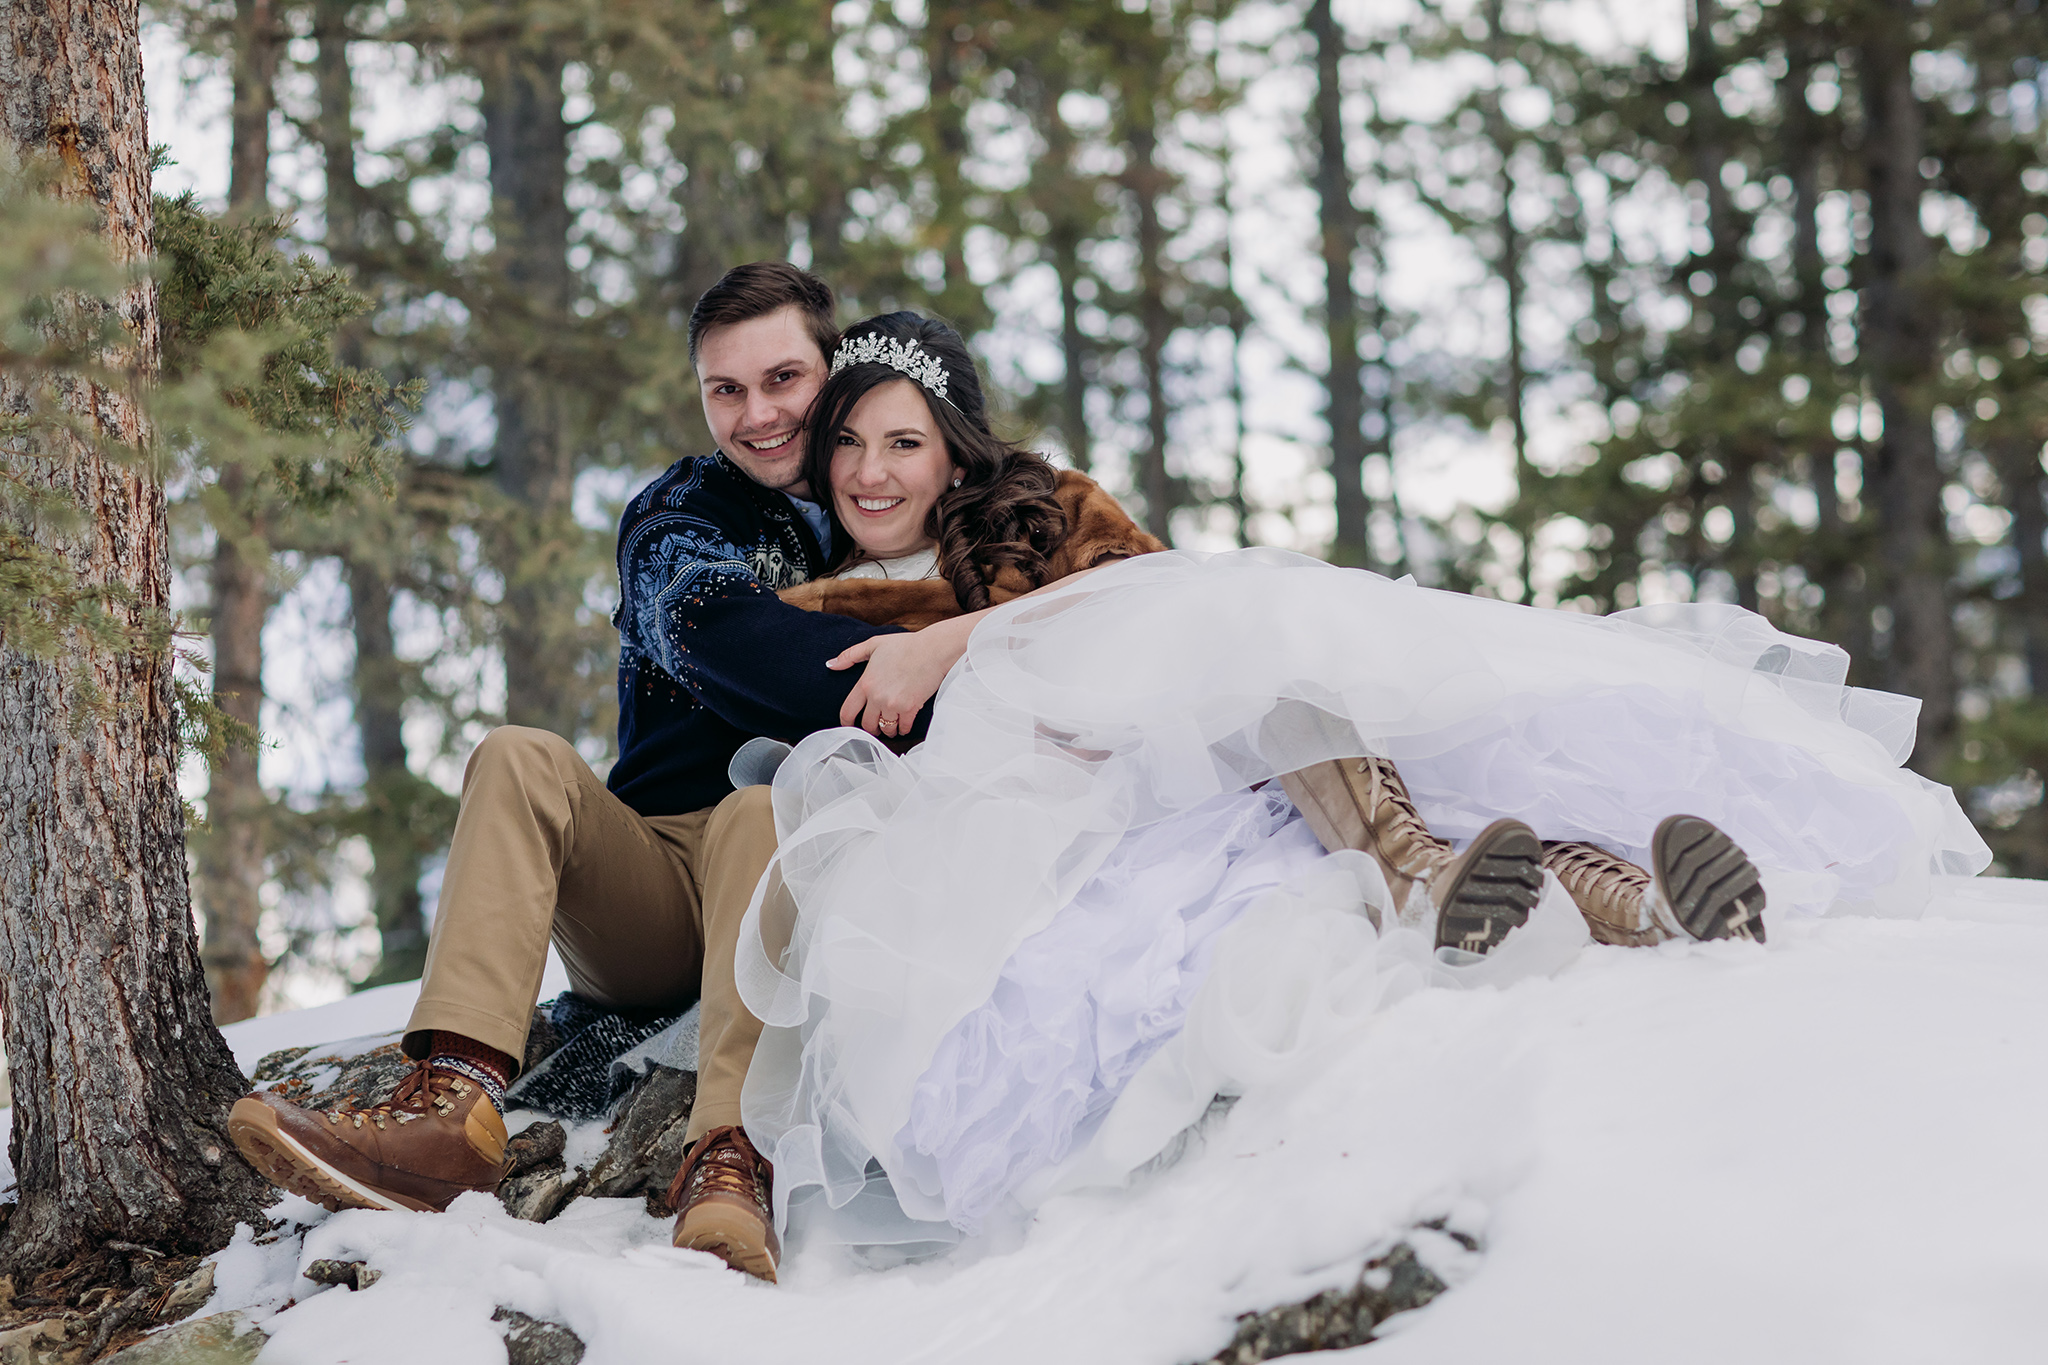 Lake Minnewanka Banff wedding portraits winter in the mountains photographed by ENV Photography